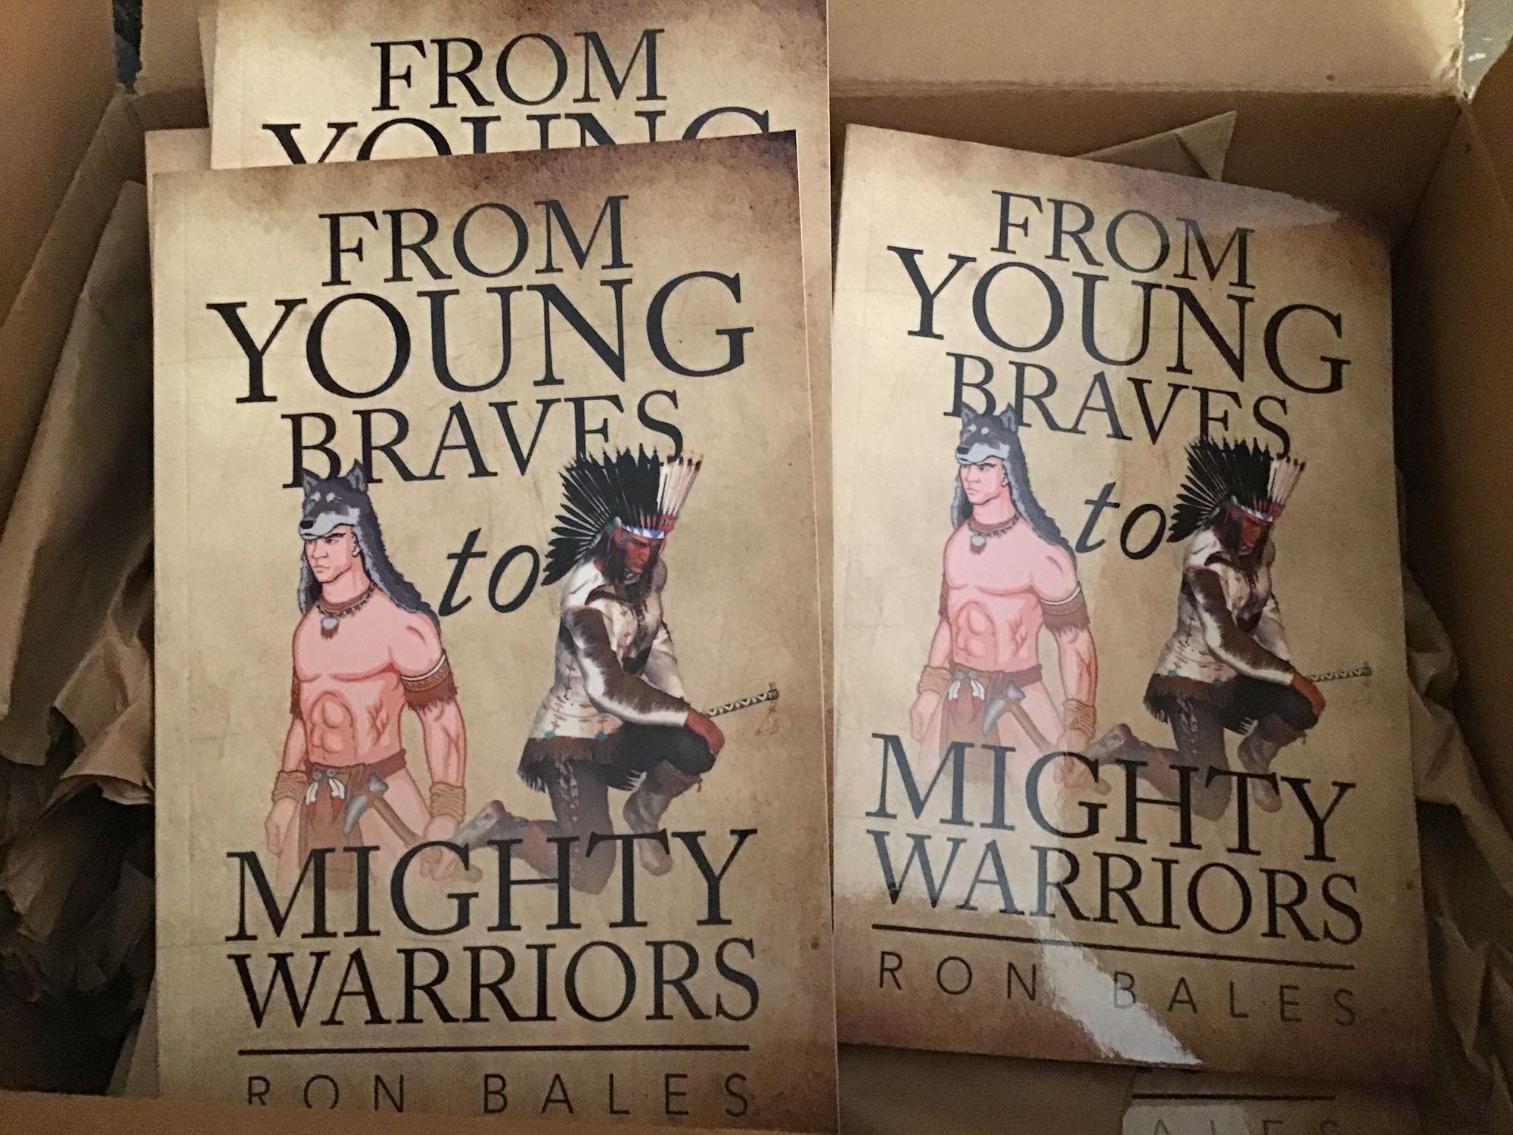 Image for Ron Bales Book “From Young Braves to Mighty Warriors”